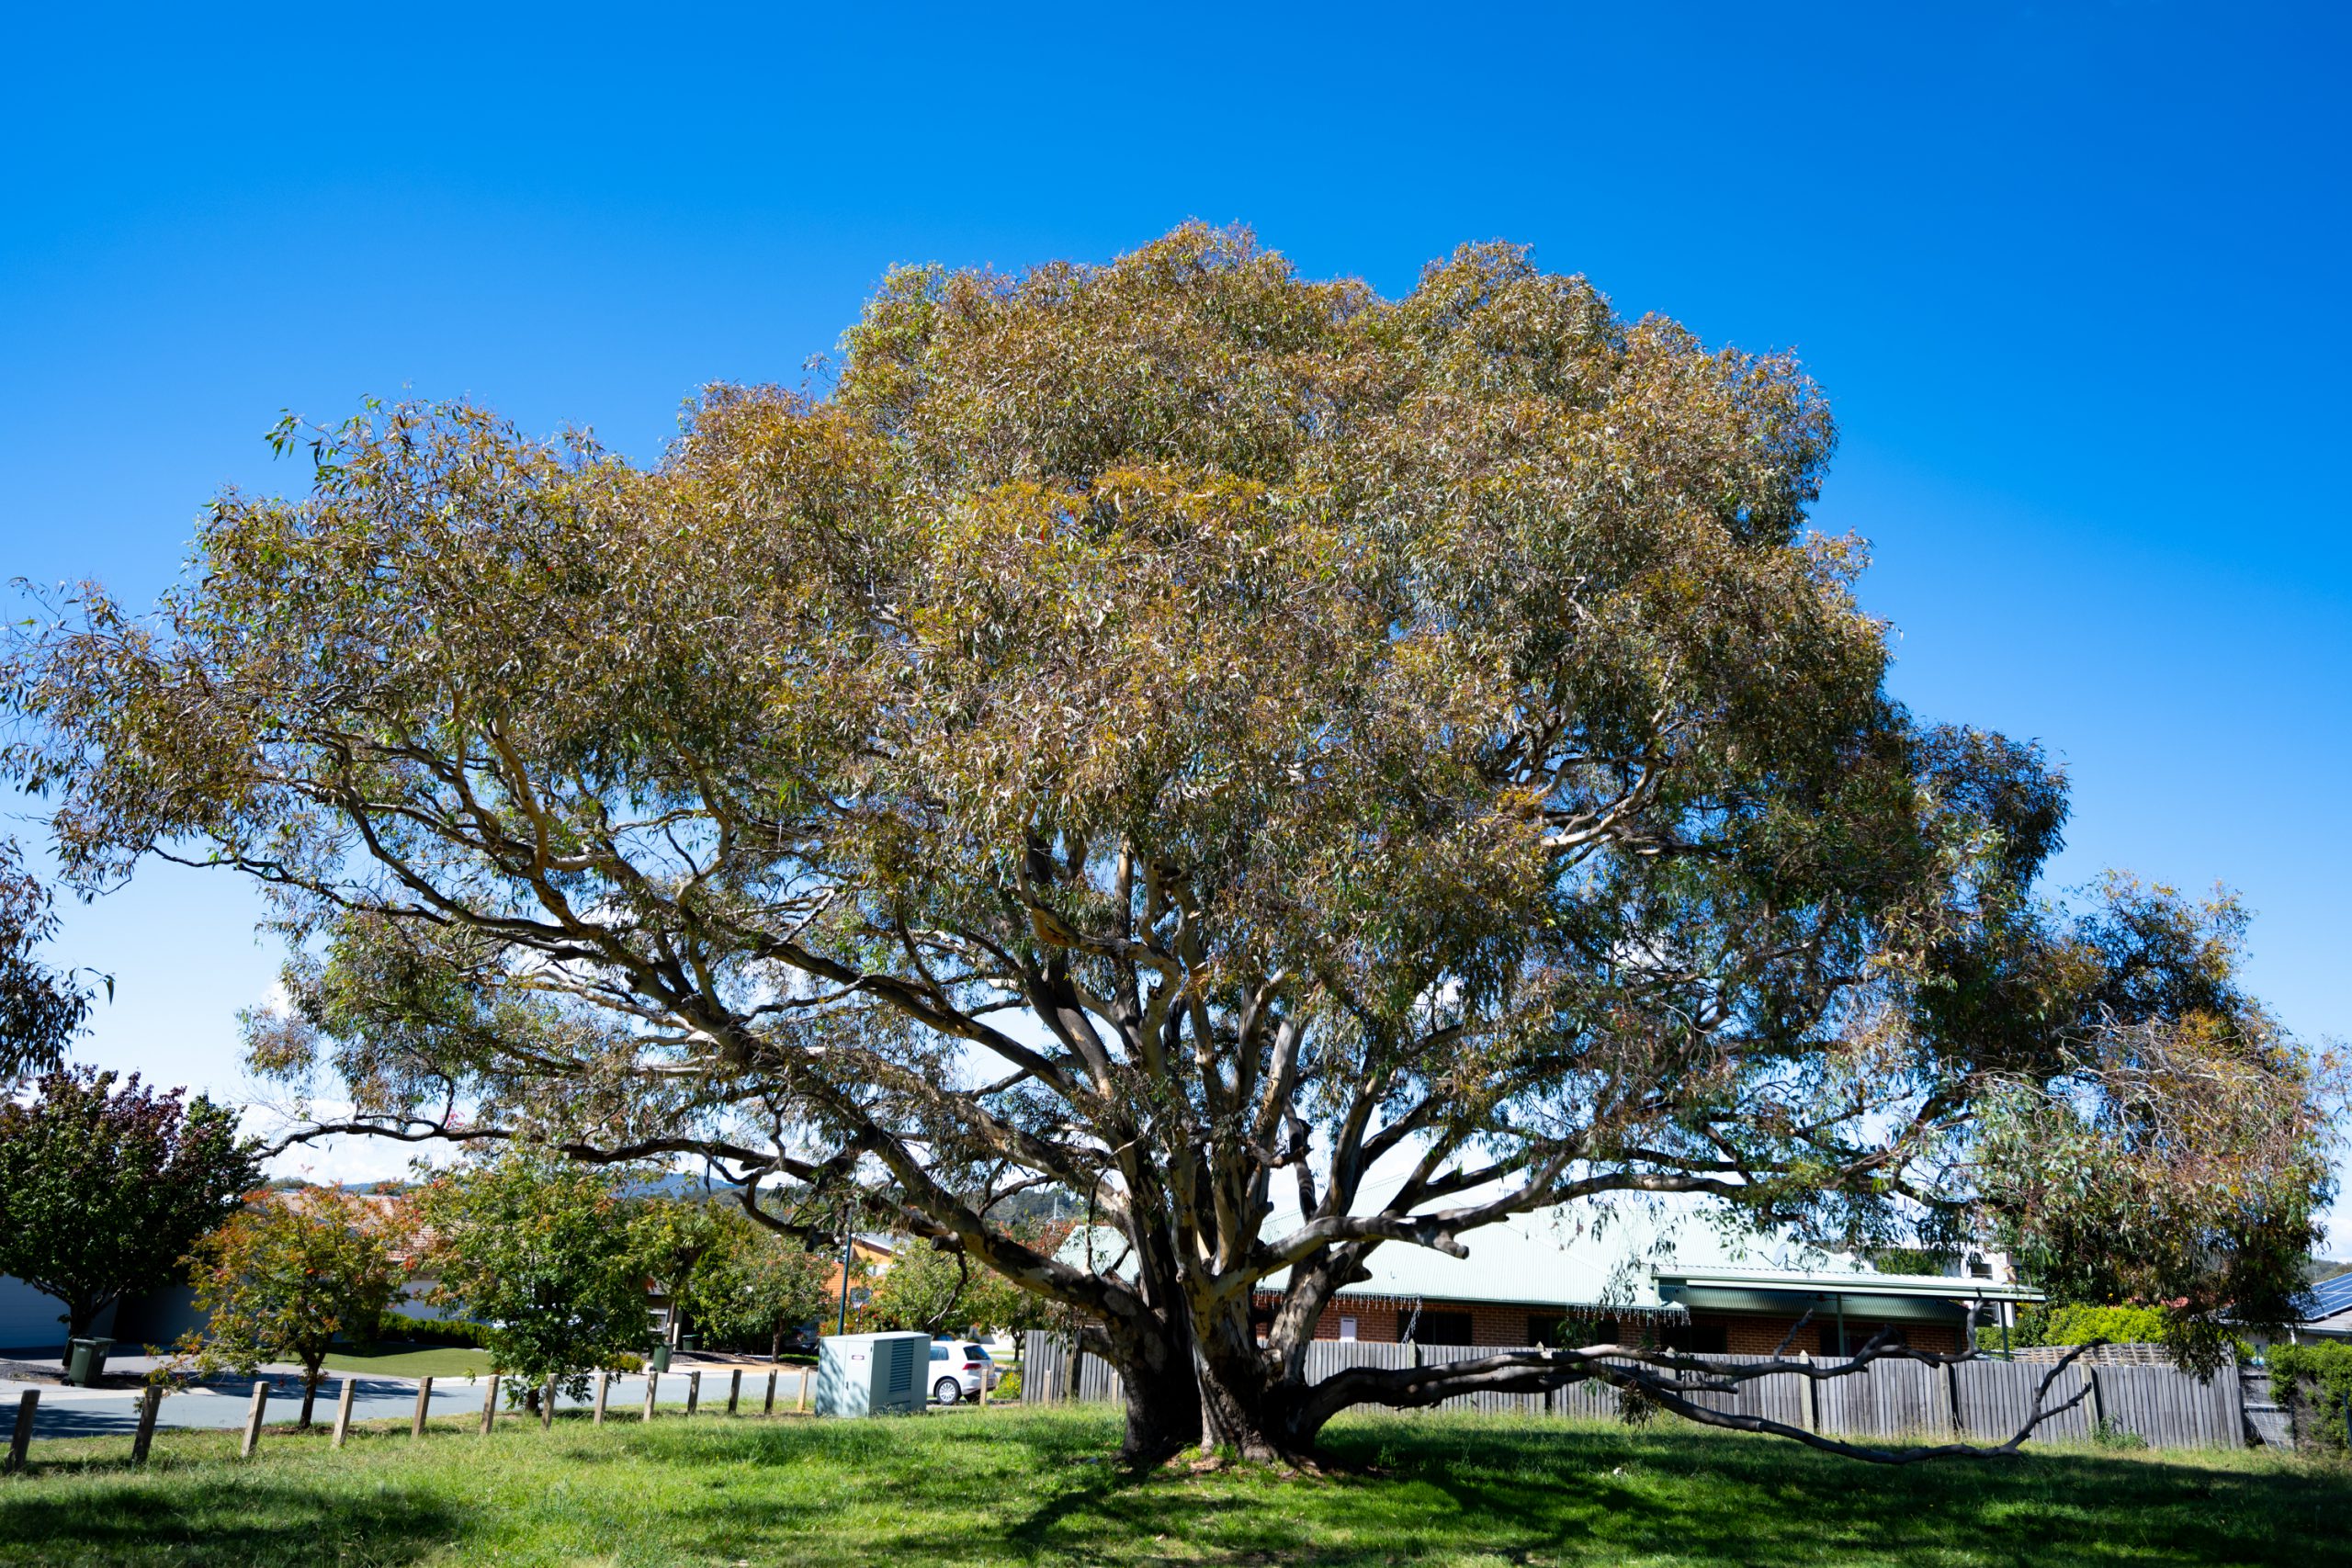 A very large Red Gum  situated on a corner park in a suburb. It has multiple trunks at the base with a hollow where a person could sit, and a very long branch at human height on one side.